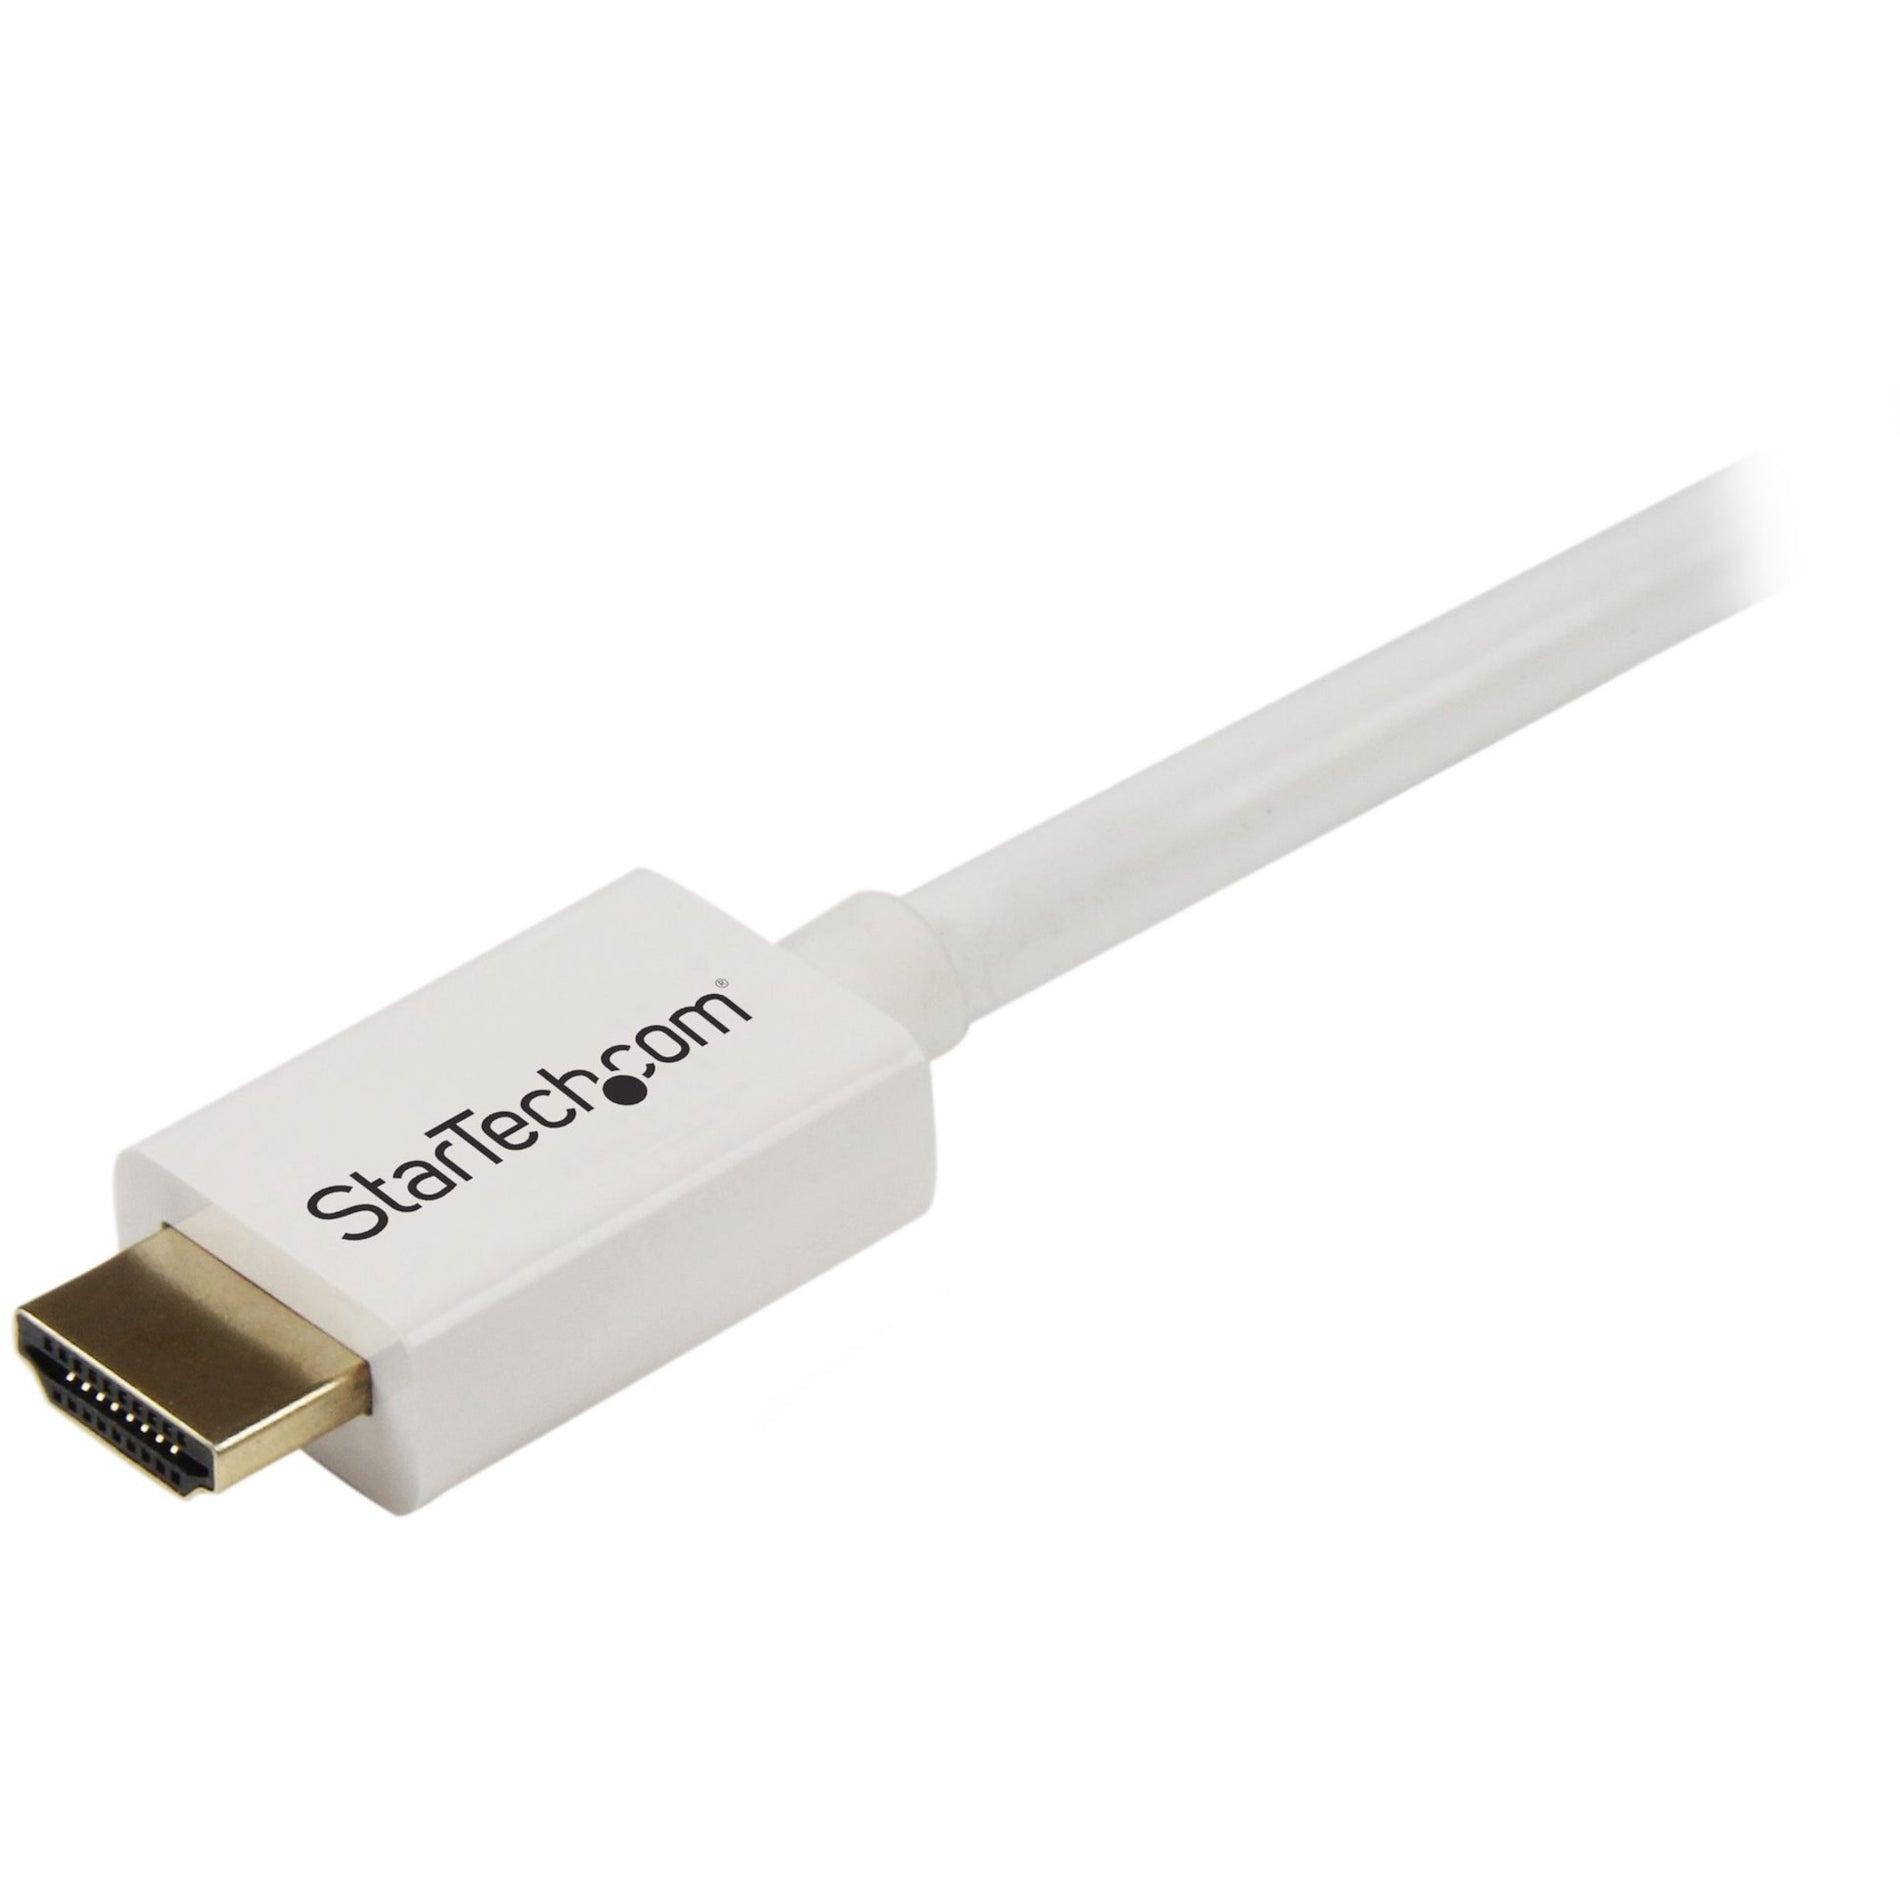 StarTech.com HD3MM5MW 5m (16 ft) White CL3 In-wall High Speed HDMI Cable - HDMI to HDMI - M/M, Corrosion-free, 10.2 Gbit/s Data Transfer Rate